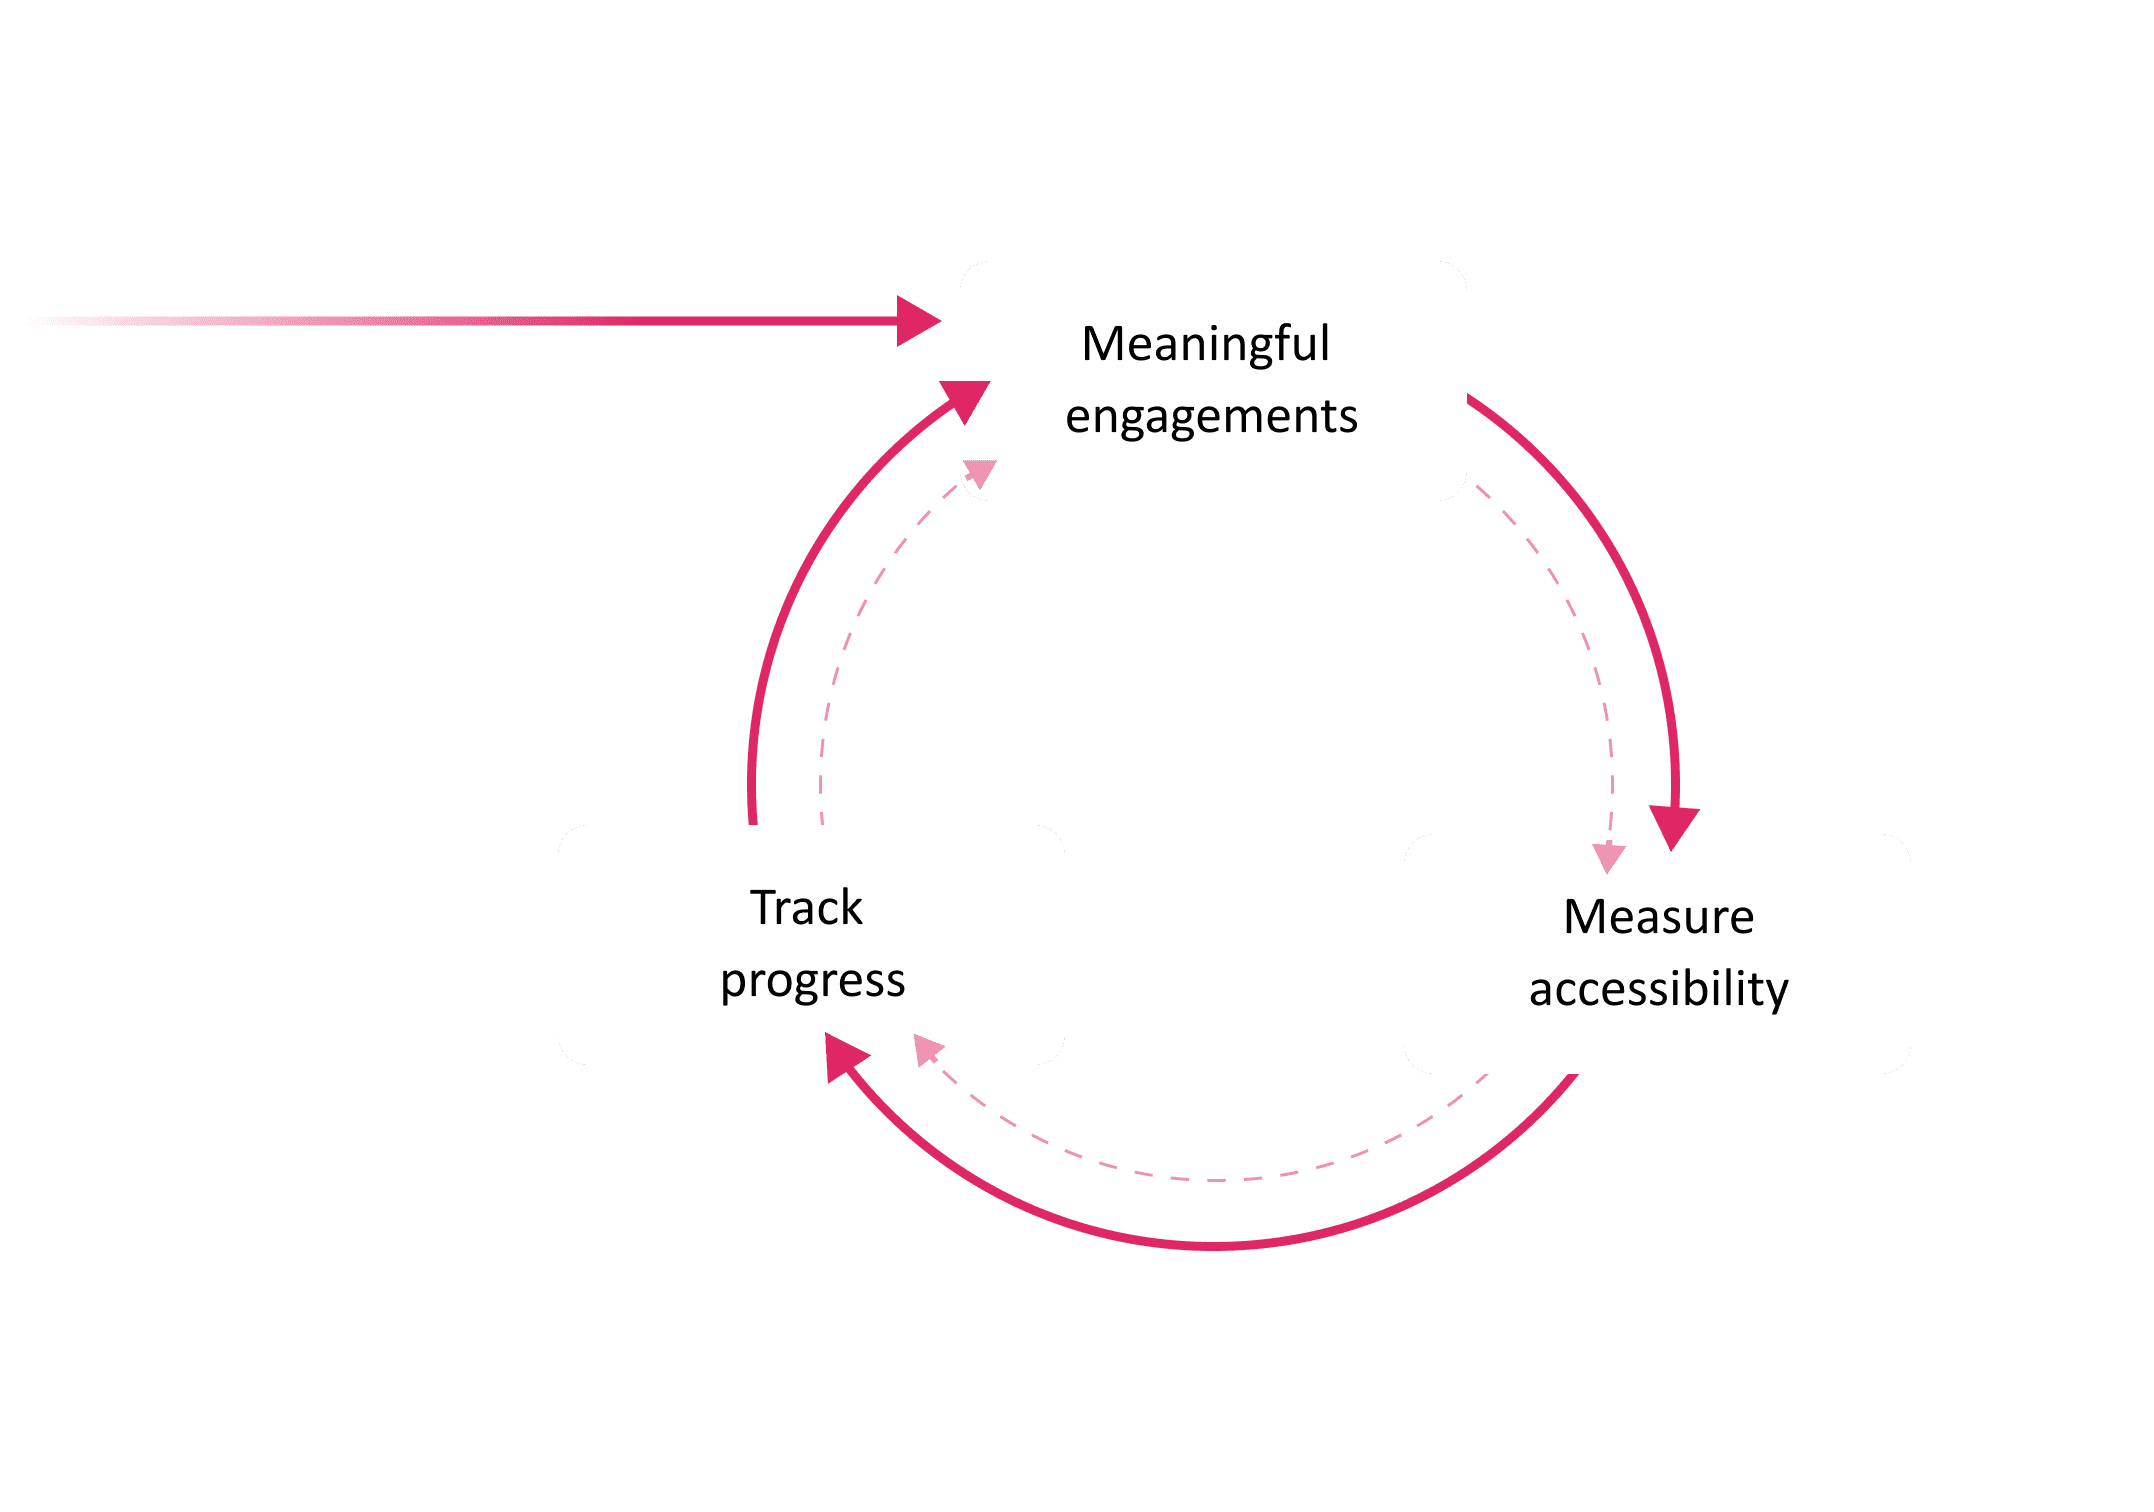 Circular graphic showing three concepts with arrows pointing from one to the next. Arrows go from Meaningful Engagements, to Measure Accessibility, to Track progress. An arrow from outside of the circle points to Meaningful Engagements, demonstrating the starting point.